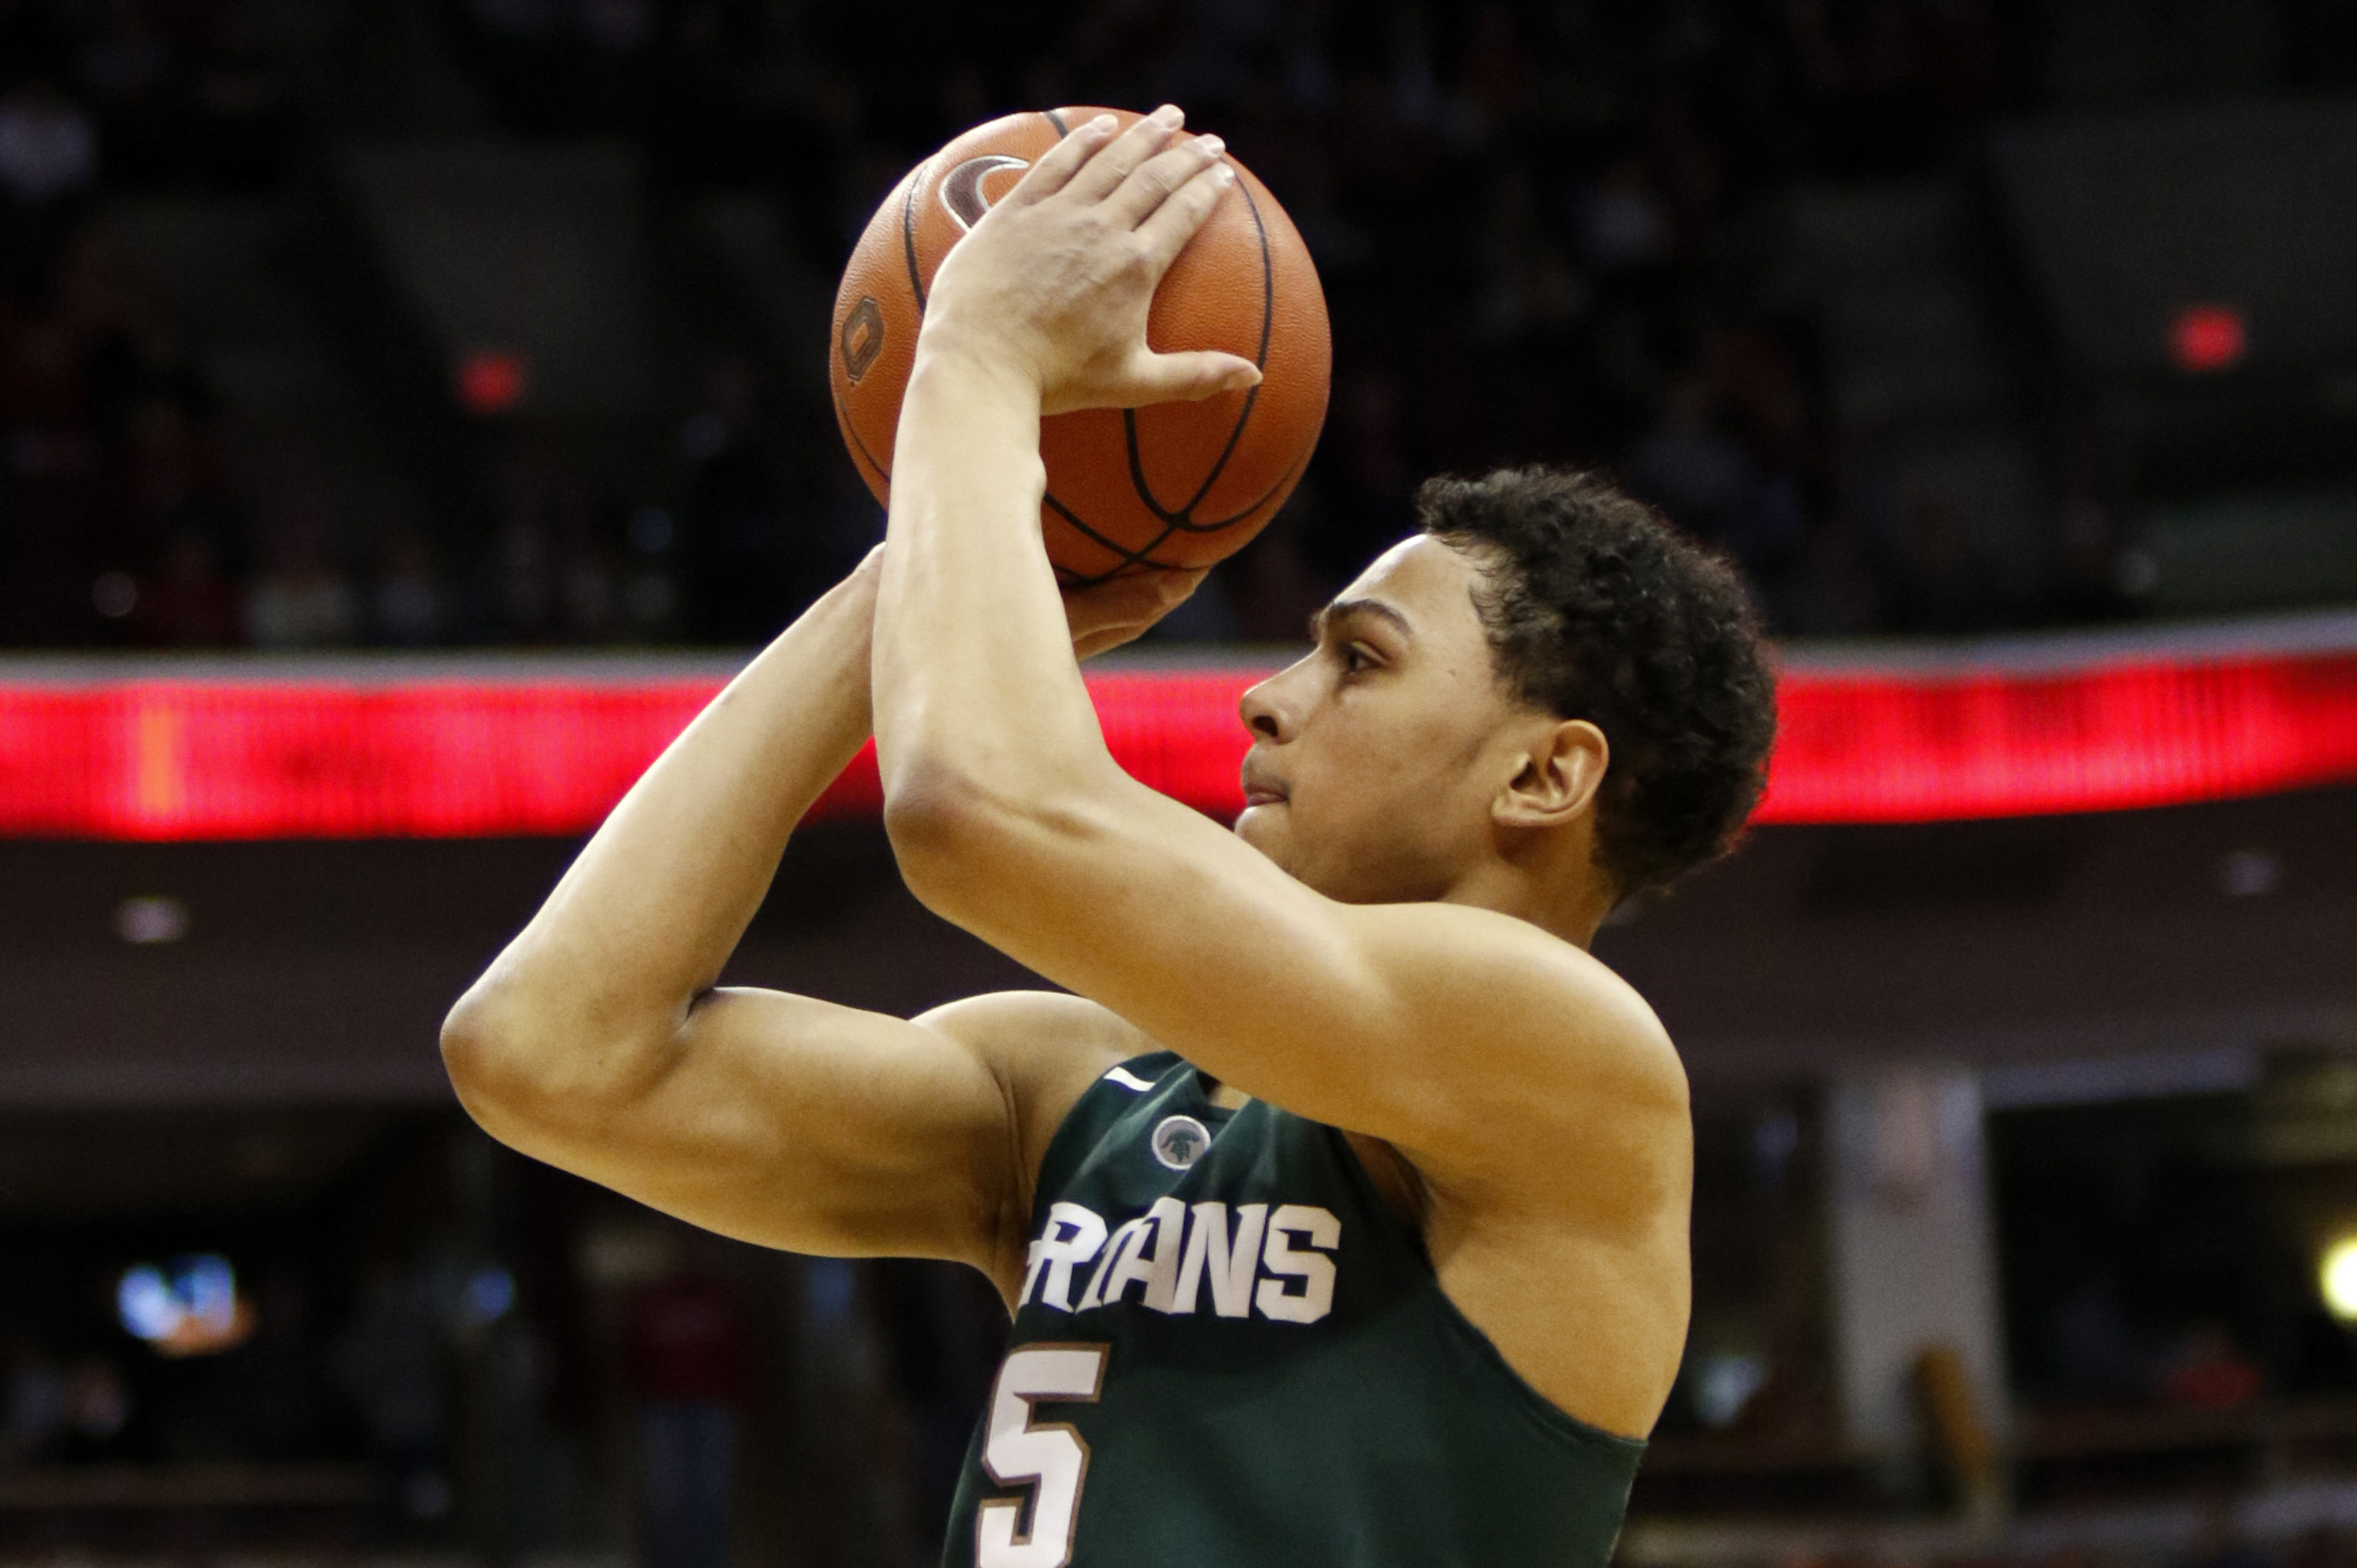 Michigan State's Bryn Forbes breaks Big Ten 3-point record